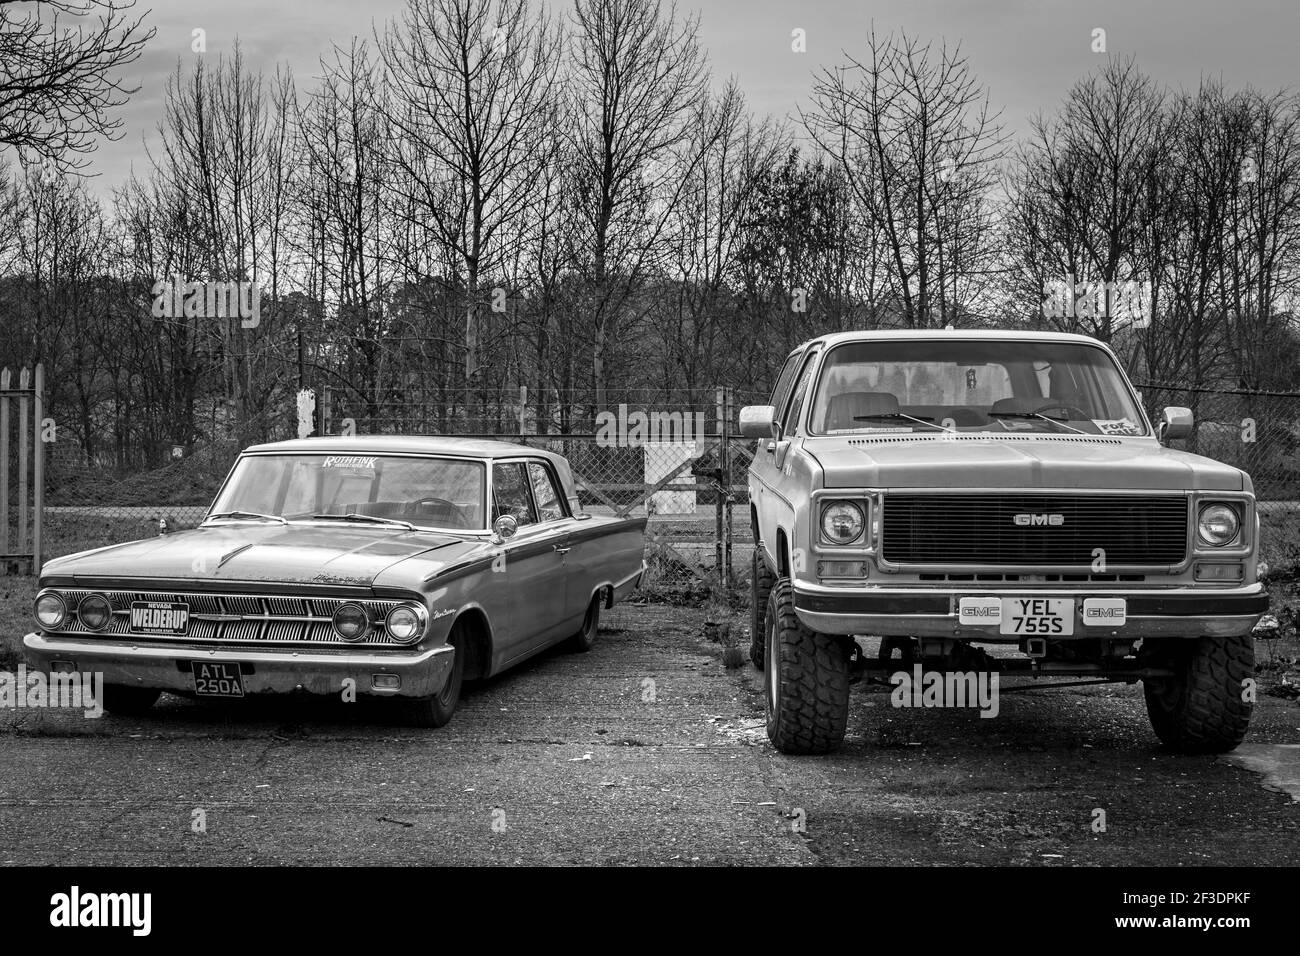 1963 Mercury Monterey and 1978 GMC Jimmy Sierra on display at the Lenwade Industrial Estate, Norfolk, UK. Stock Photo